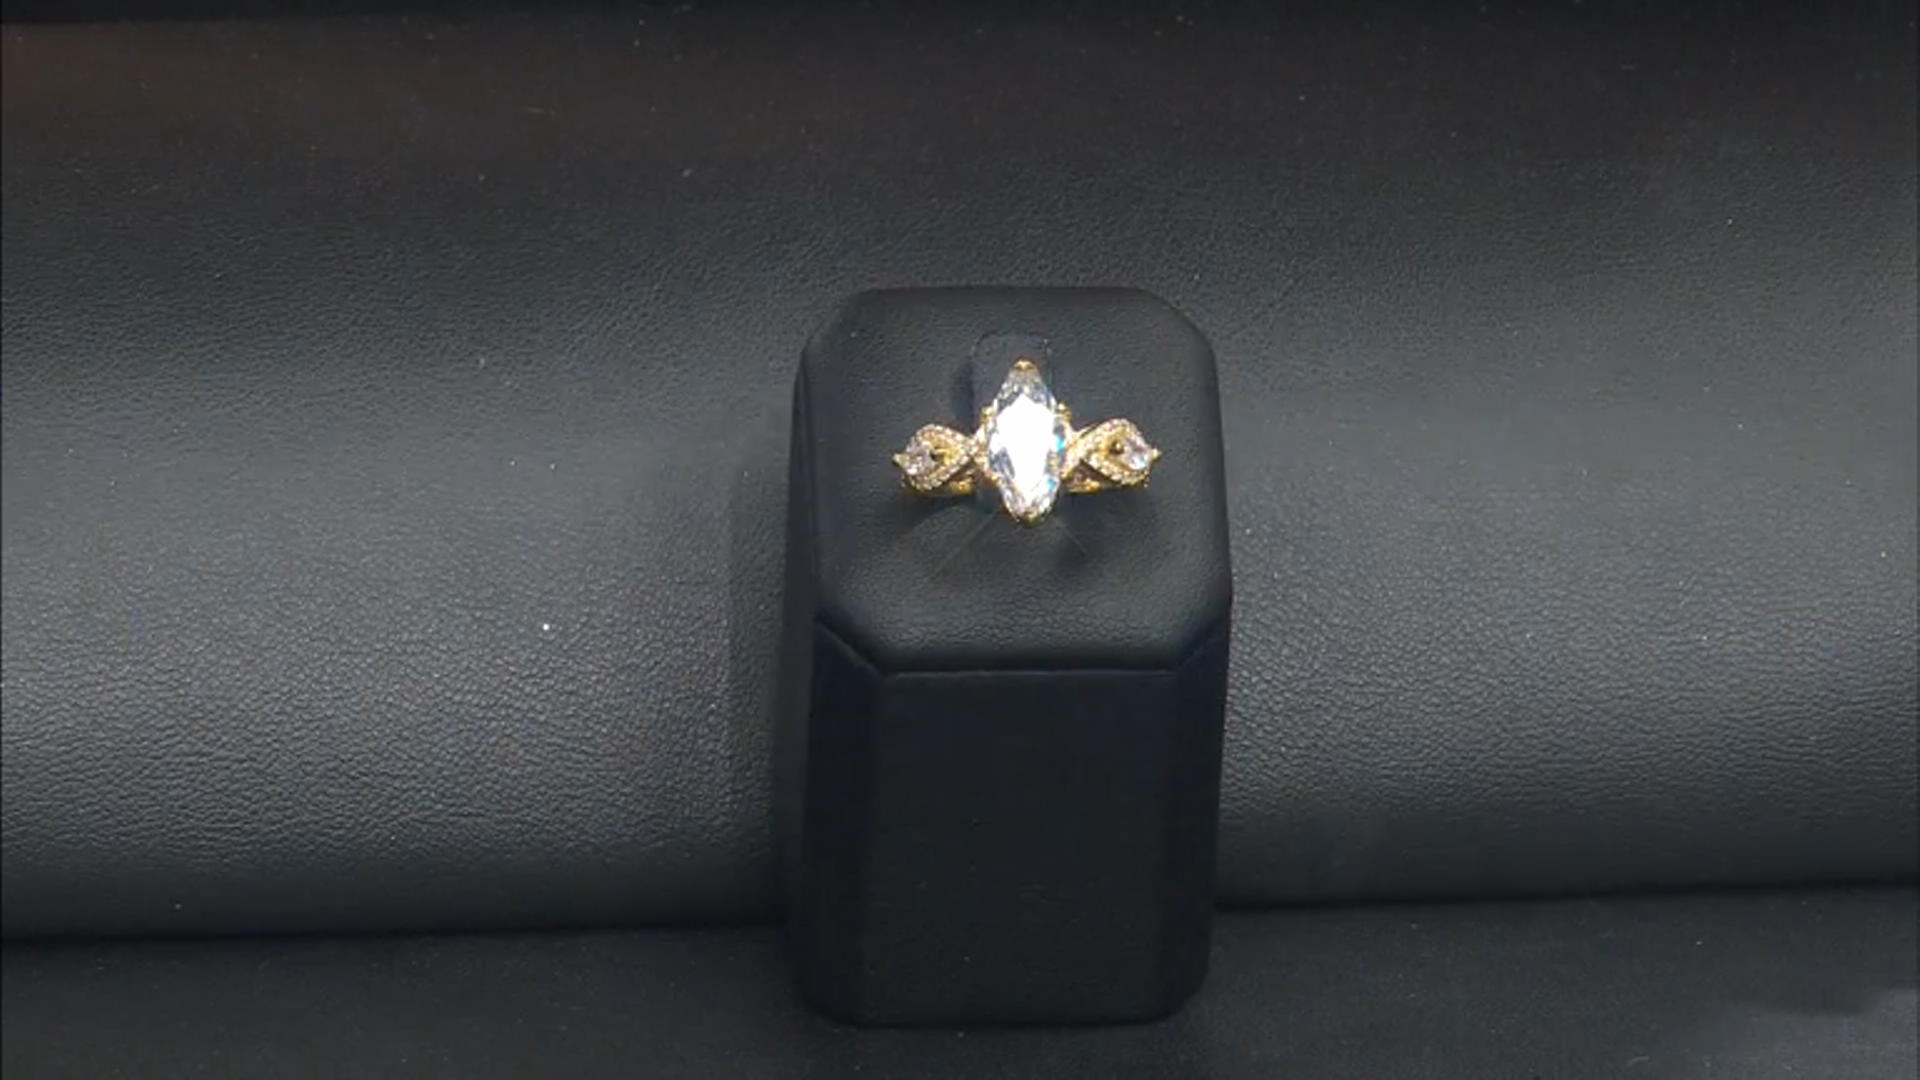 White Cubic Zirconia 18K Yellow Gold Over Sterling Silver Ring 5.33ctw Video Thumbnail